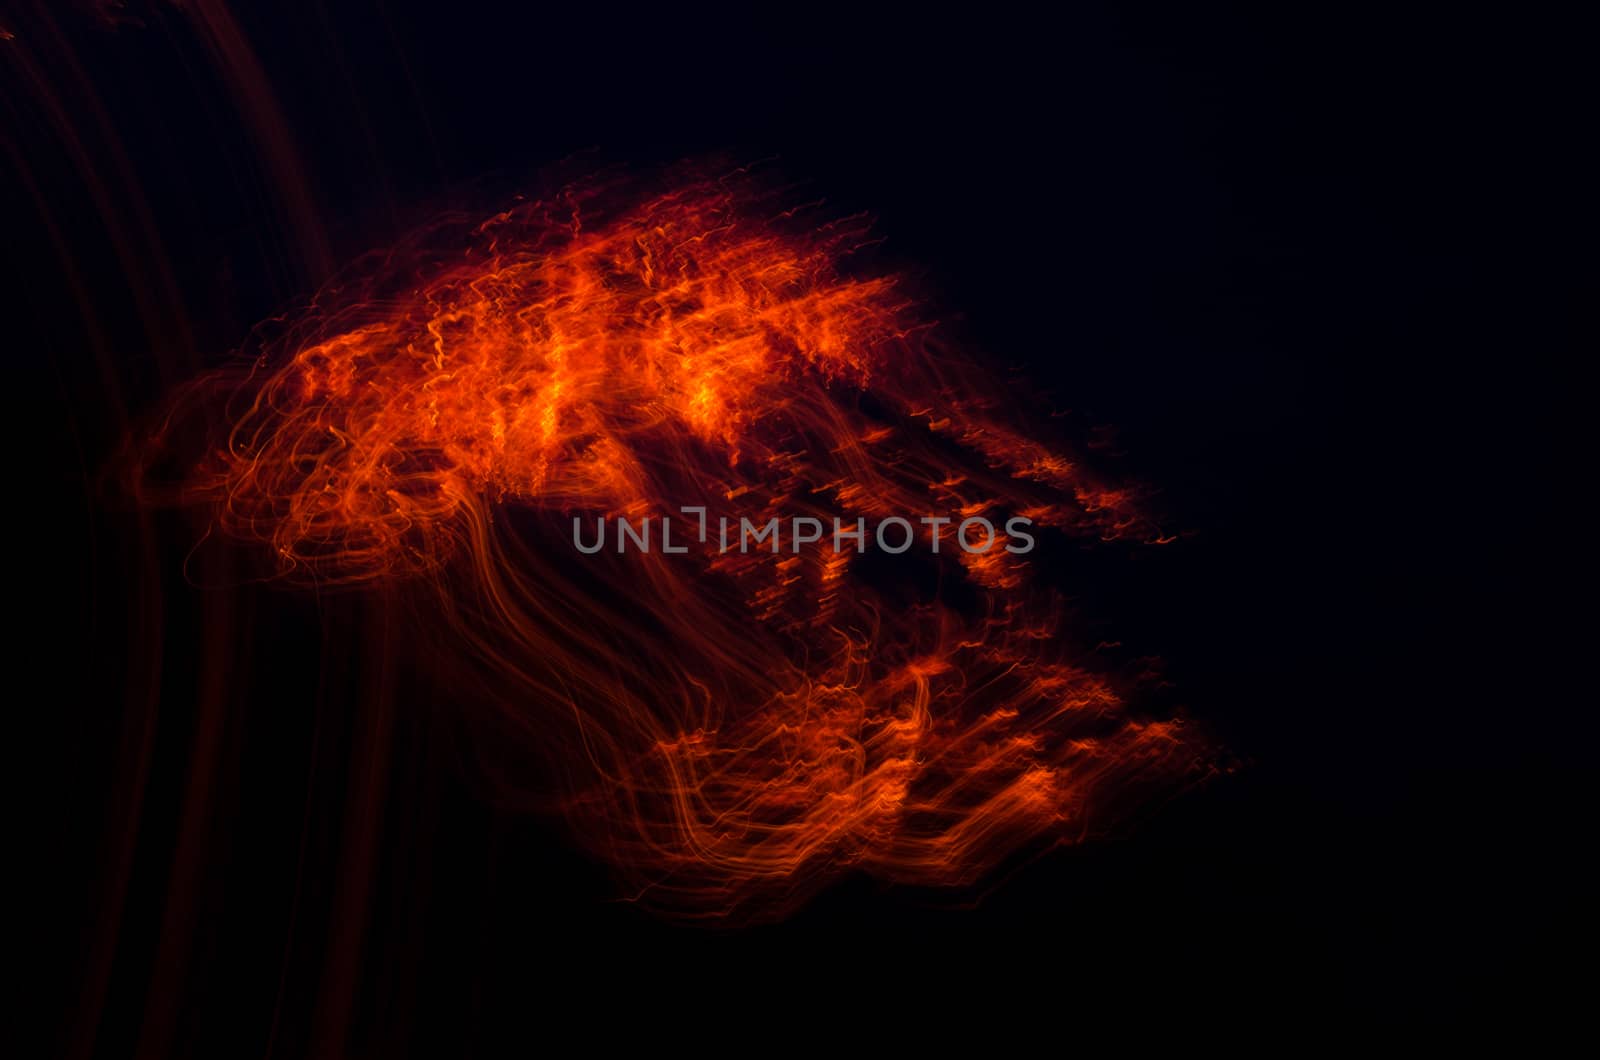 miraculous image of fire formed in dark of night by sauletas